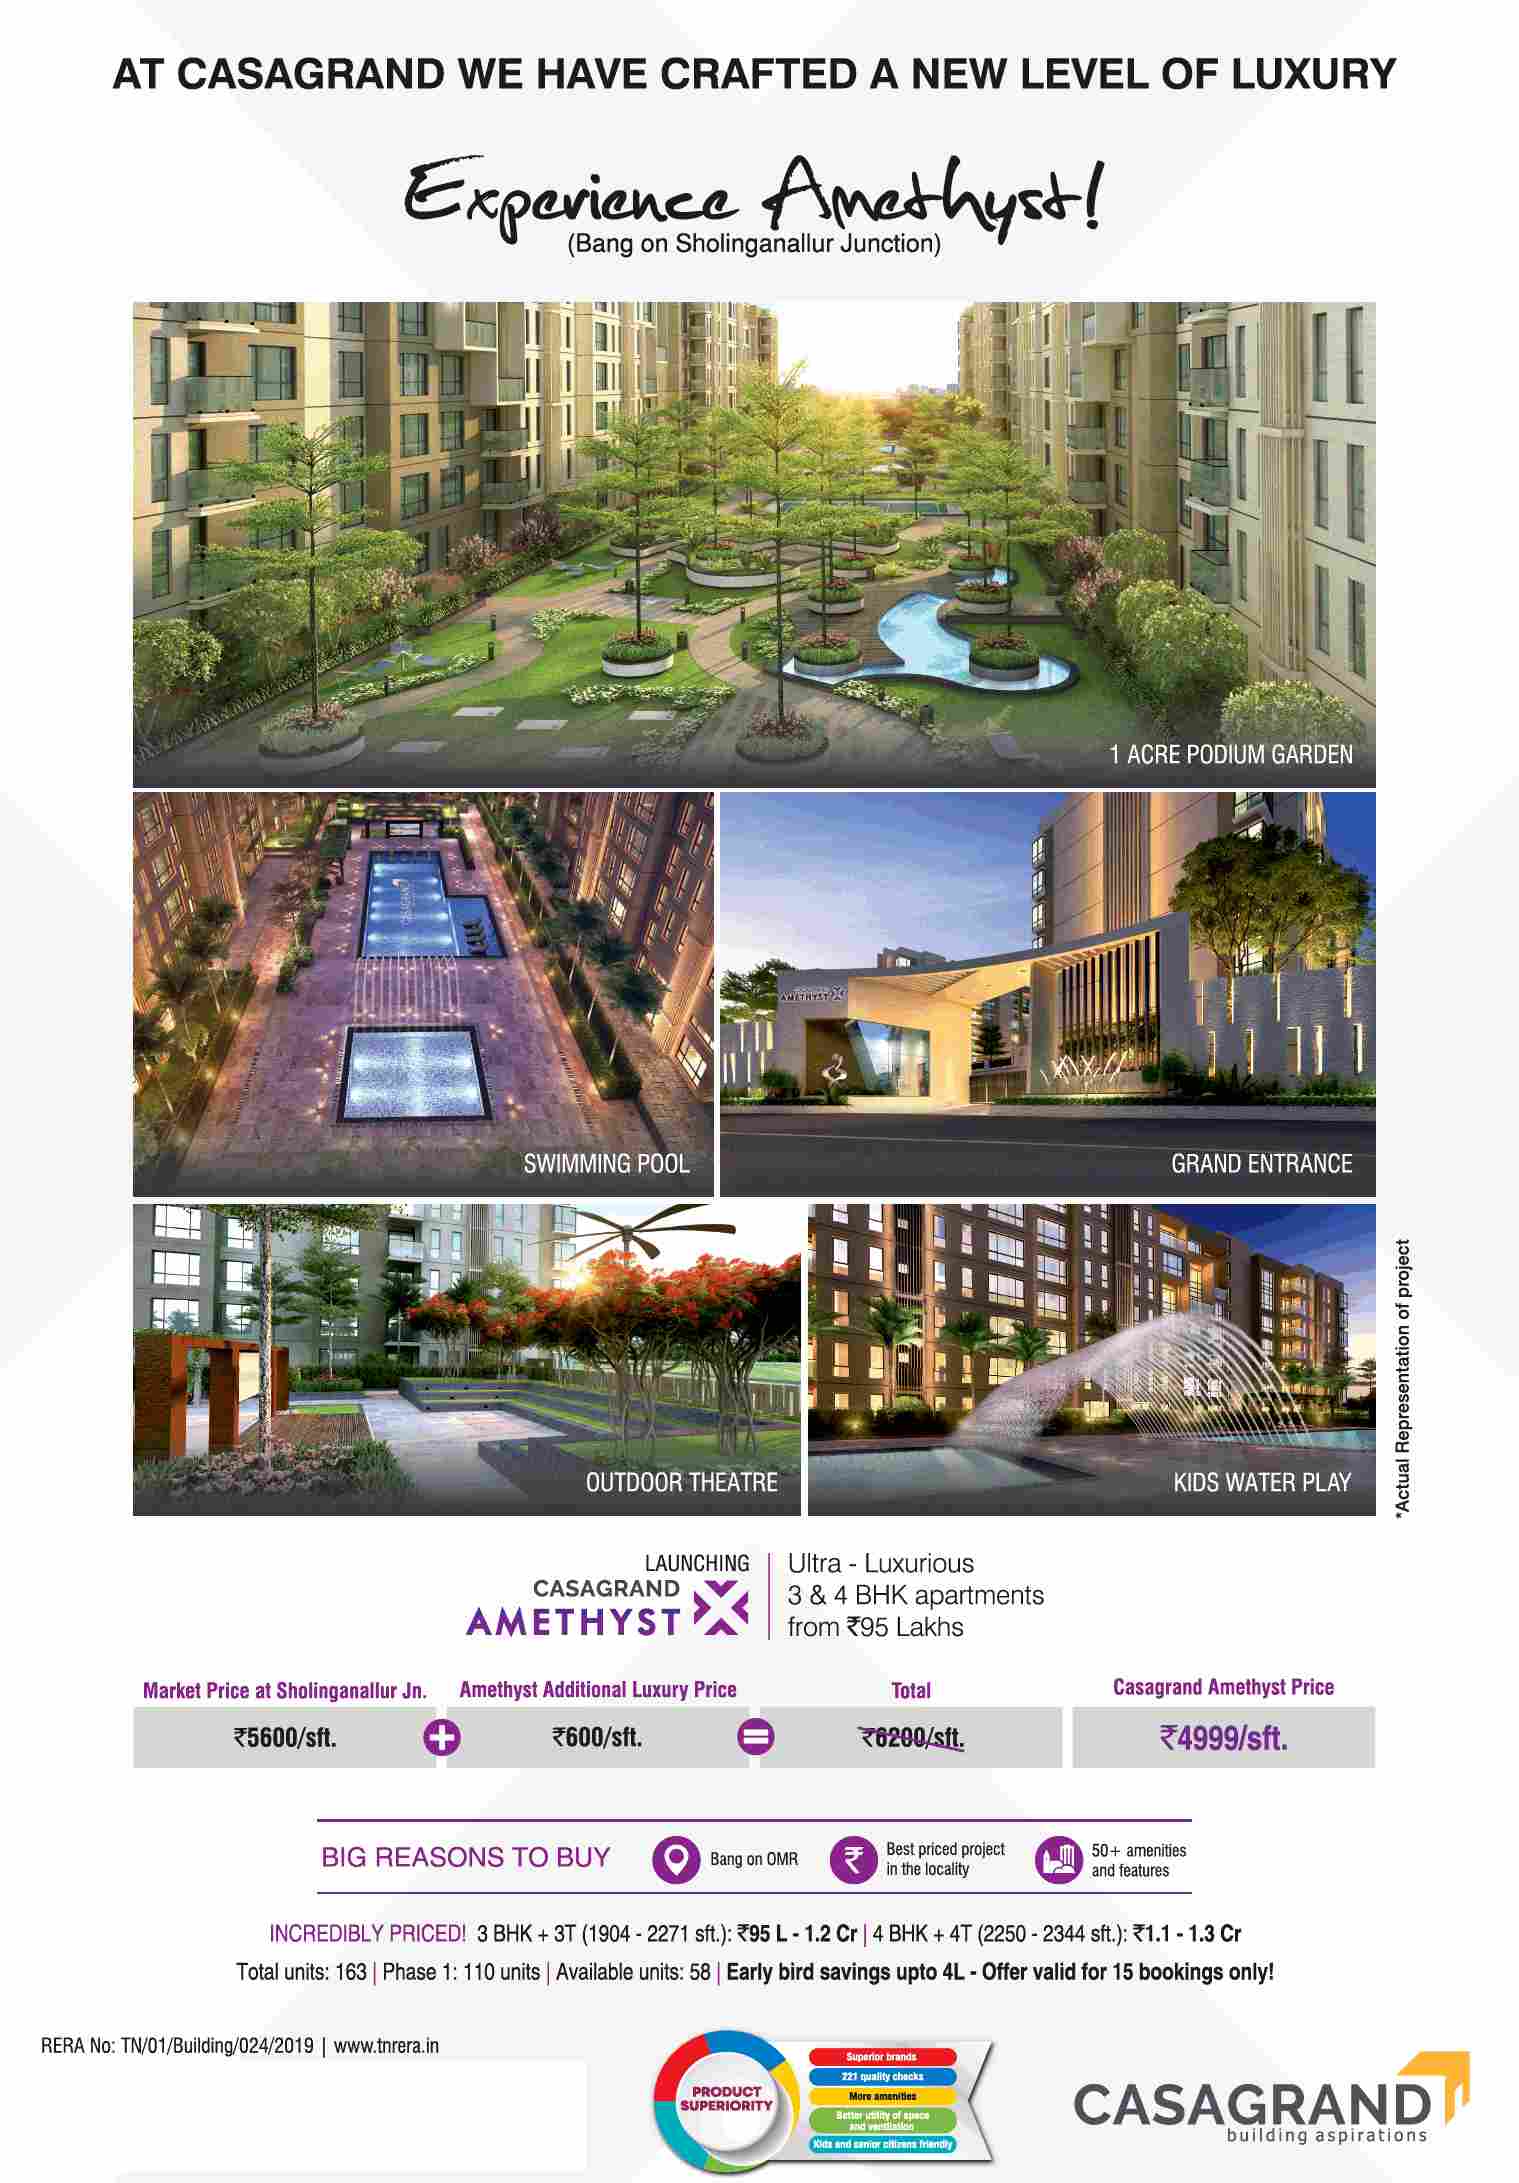 Book ultra-luxurious 3 & 4 BHK apartments @ Rs 95 Lakhs at Casagrand Amethyst in Chennai